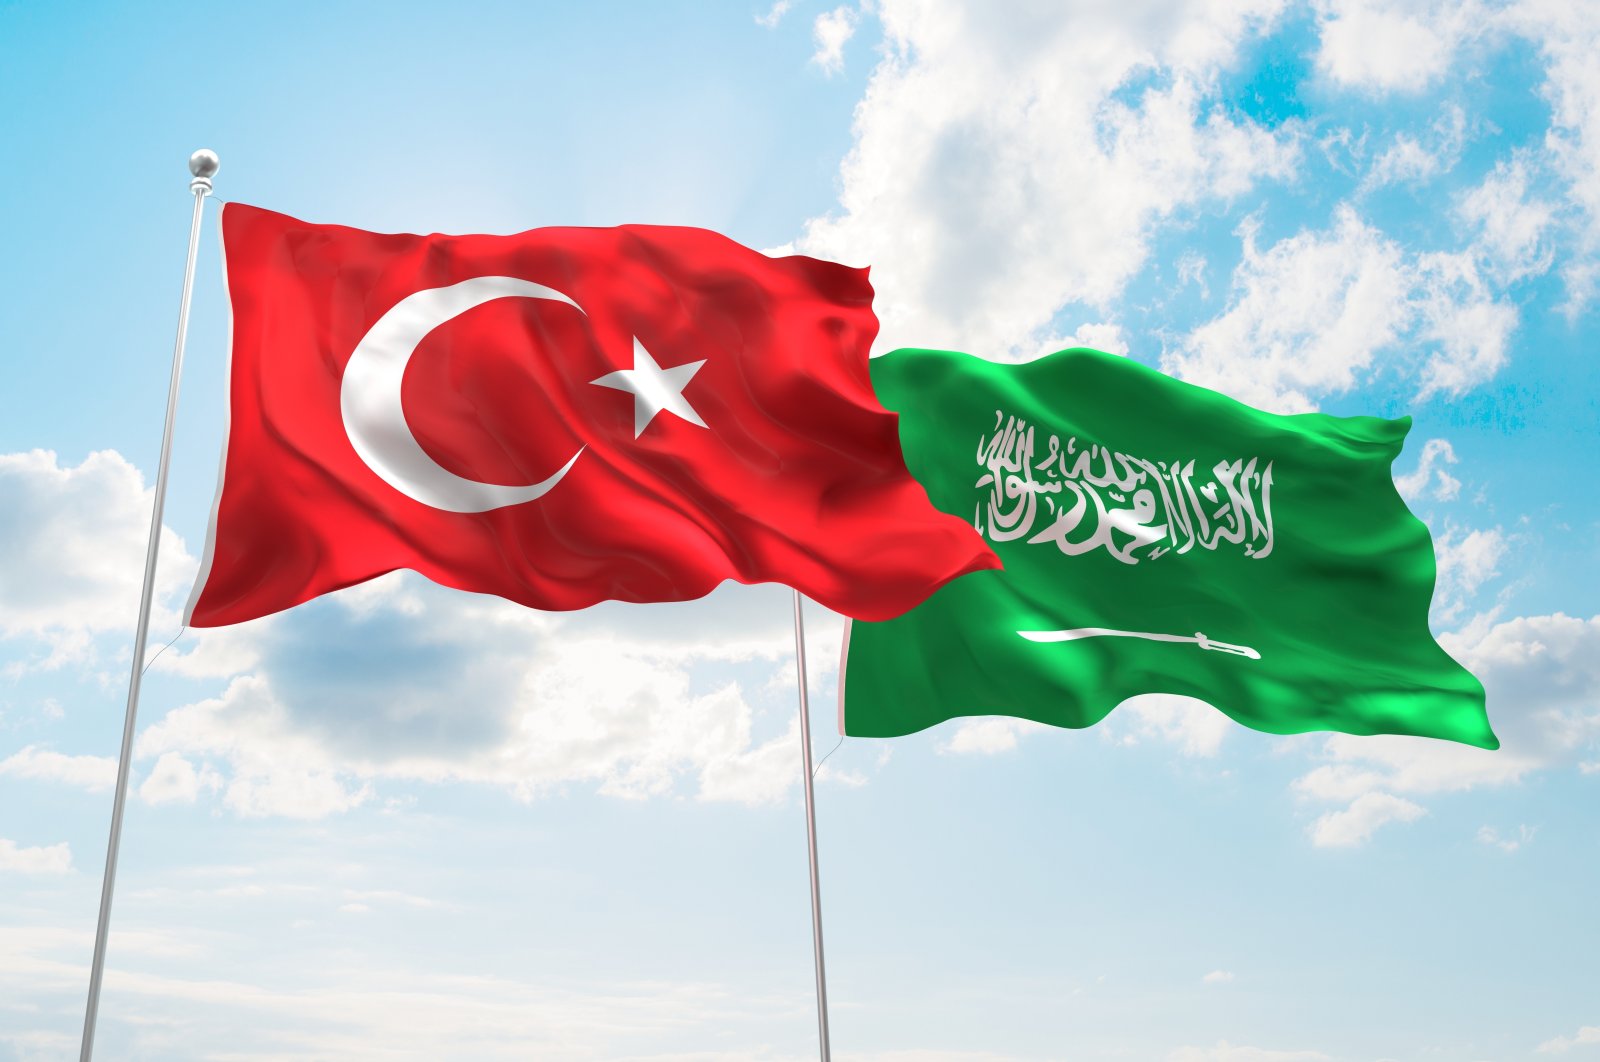 Turkish and Saudi Arabian flags wave in the blue sky in this undated file photo. (Shutterstock File Photo)